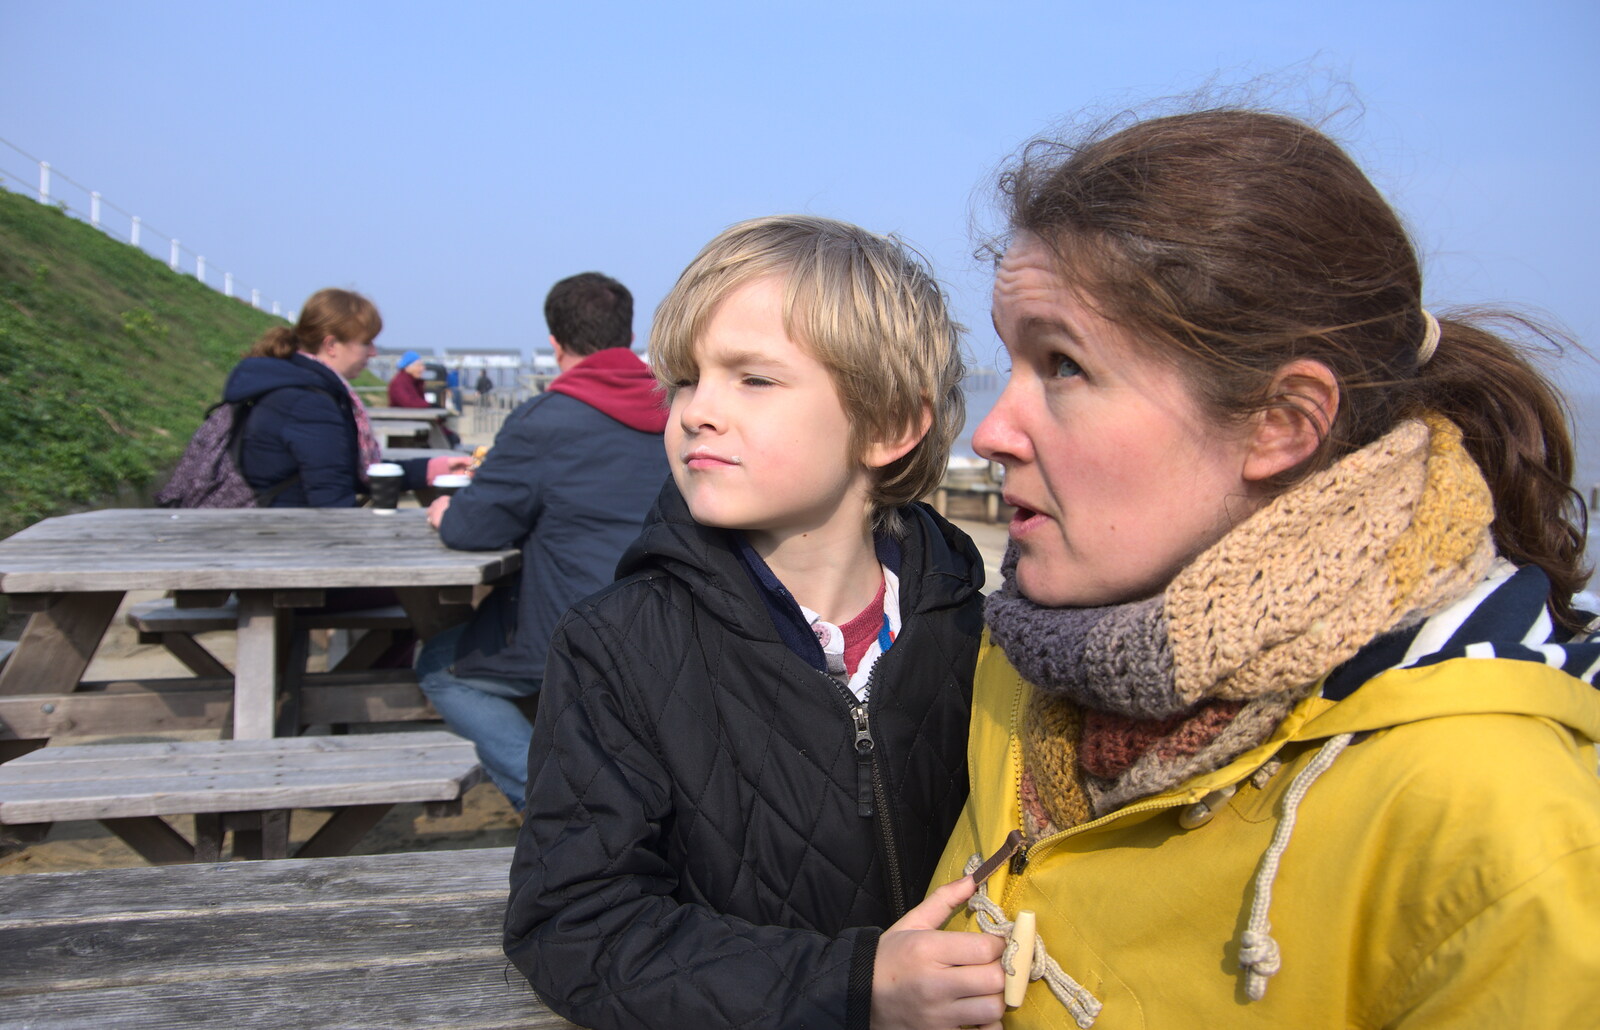 Harry and Isobel from On The Beach, Southwold, Suffolk - 7th April 2019